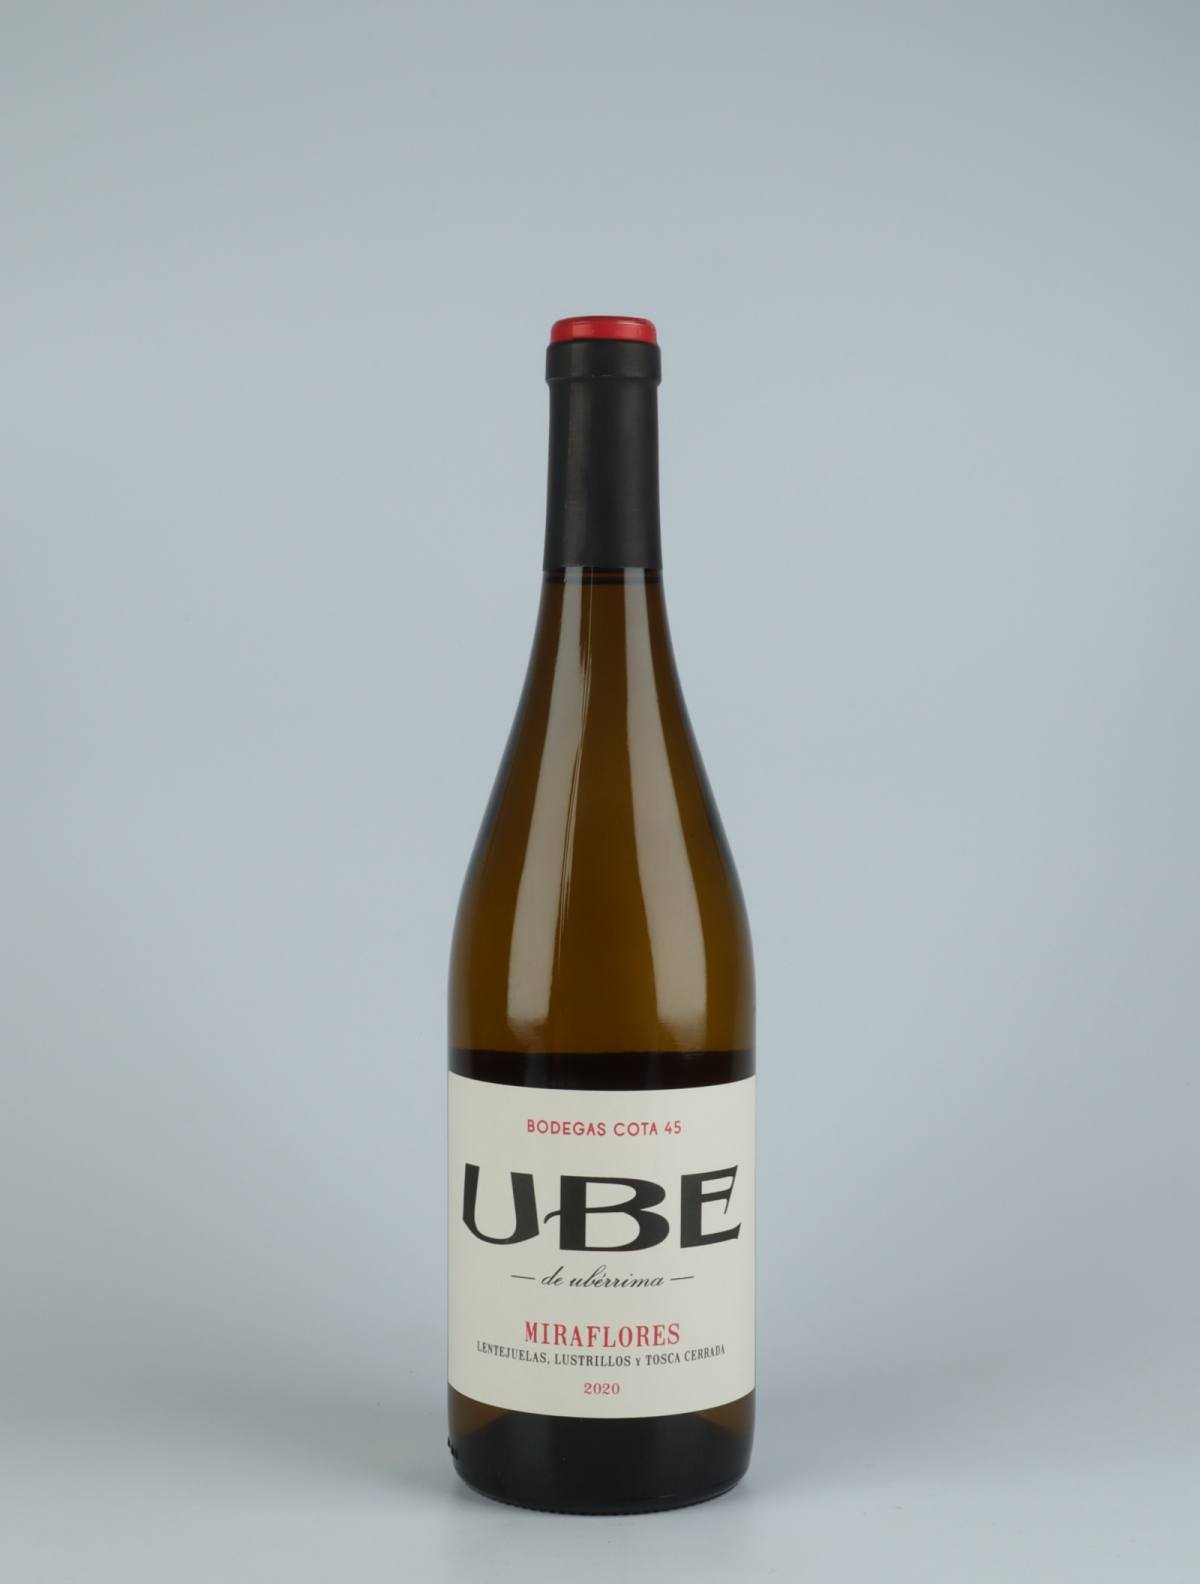 A bottle 2020 UBE Miraflores White wine from Bodegas Cota 45, Andalucia in Spain